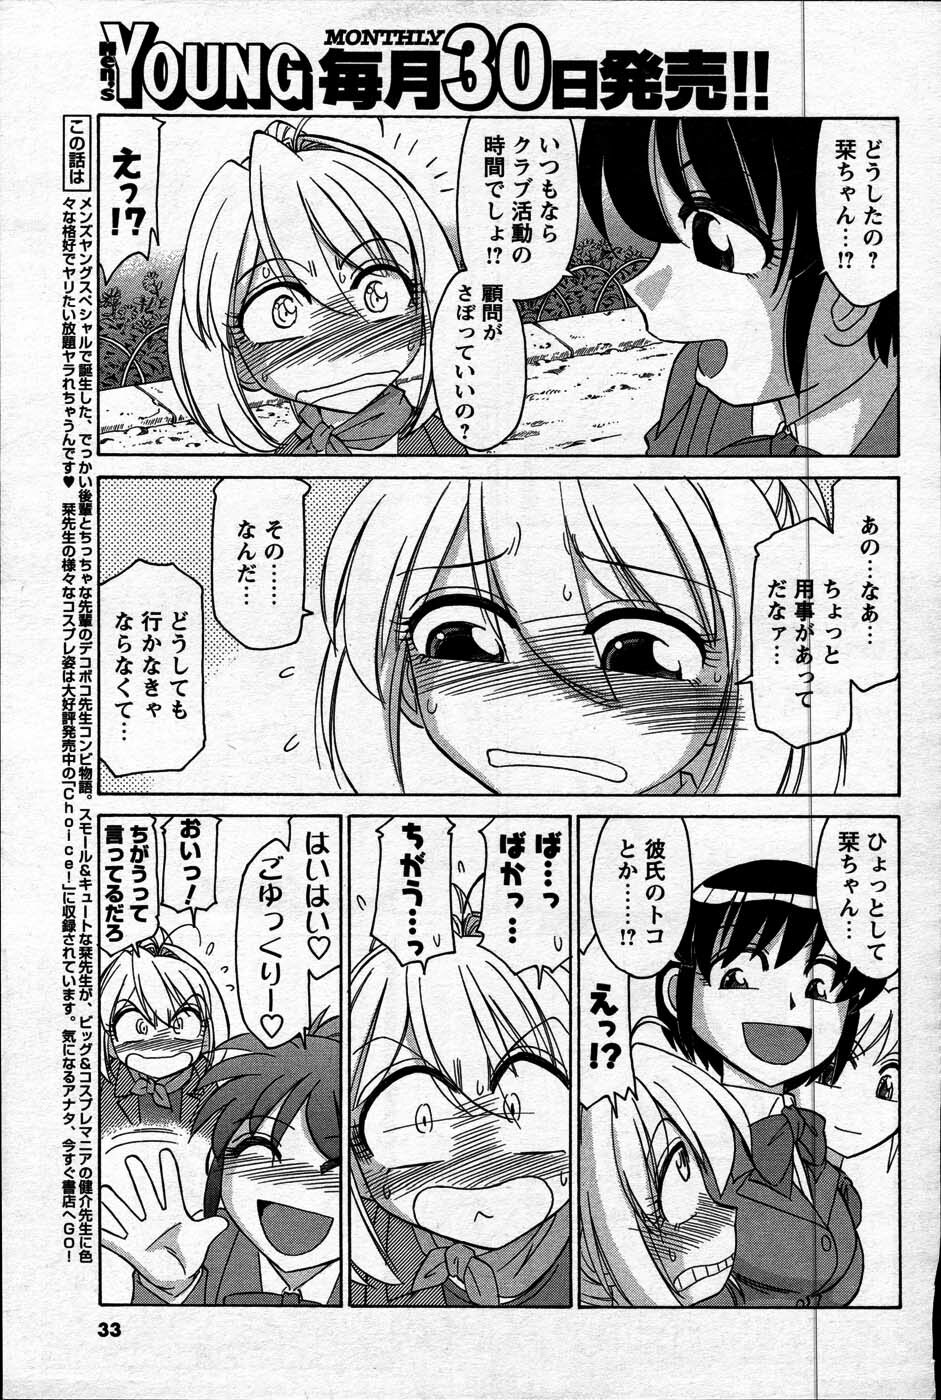 Comic Mens Young Special IKAZUCHI vol. 2 page 31 full